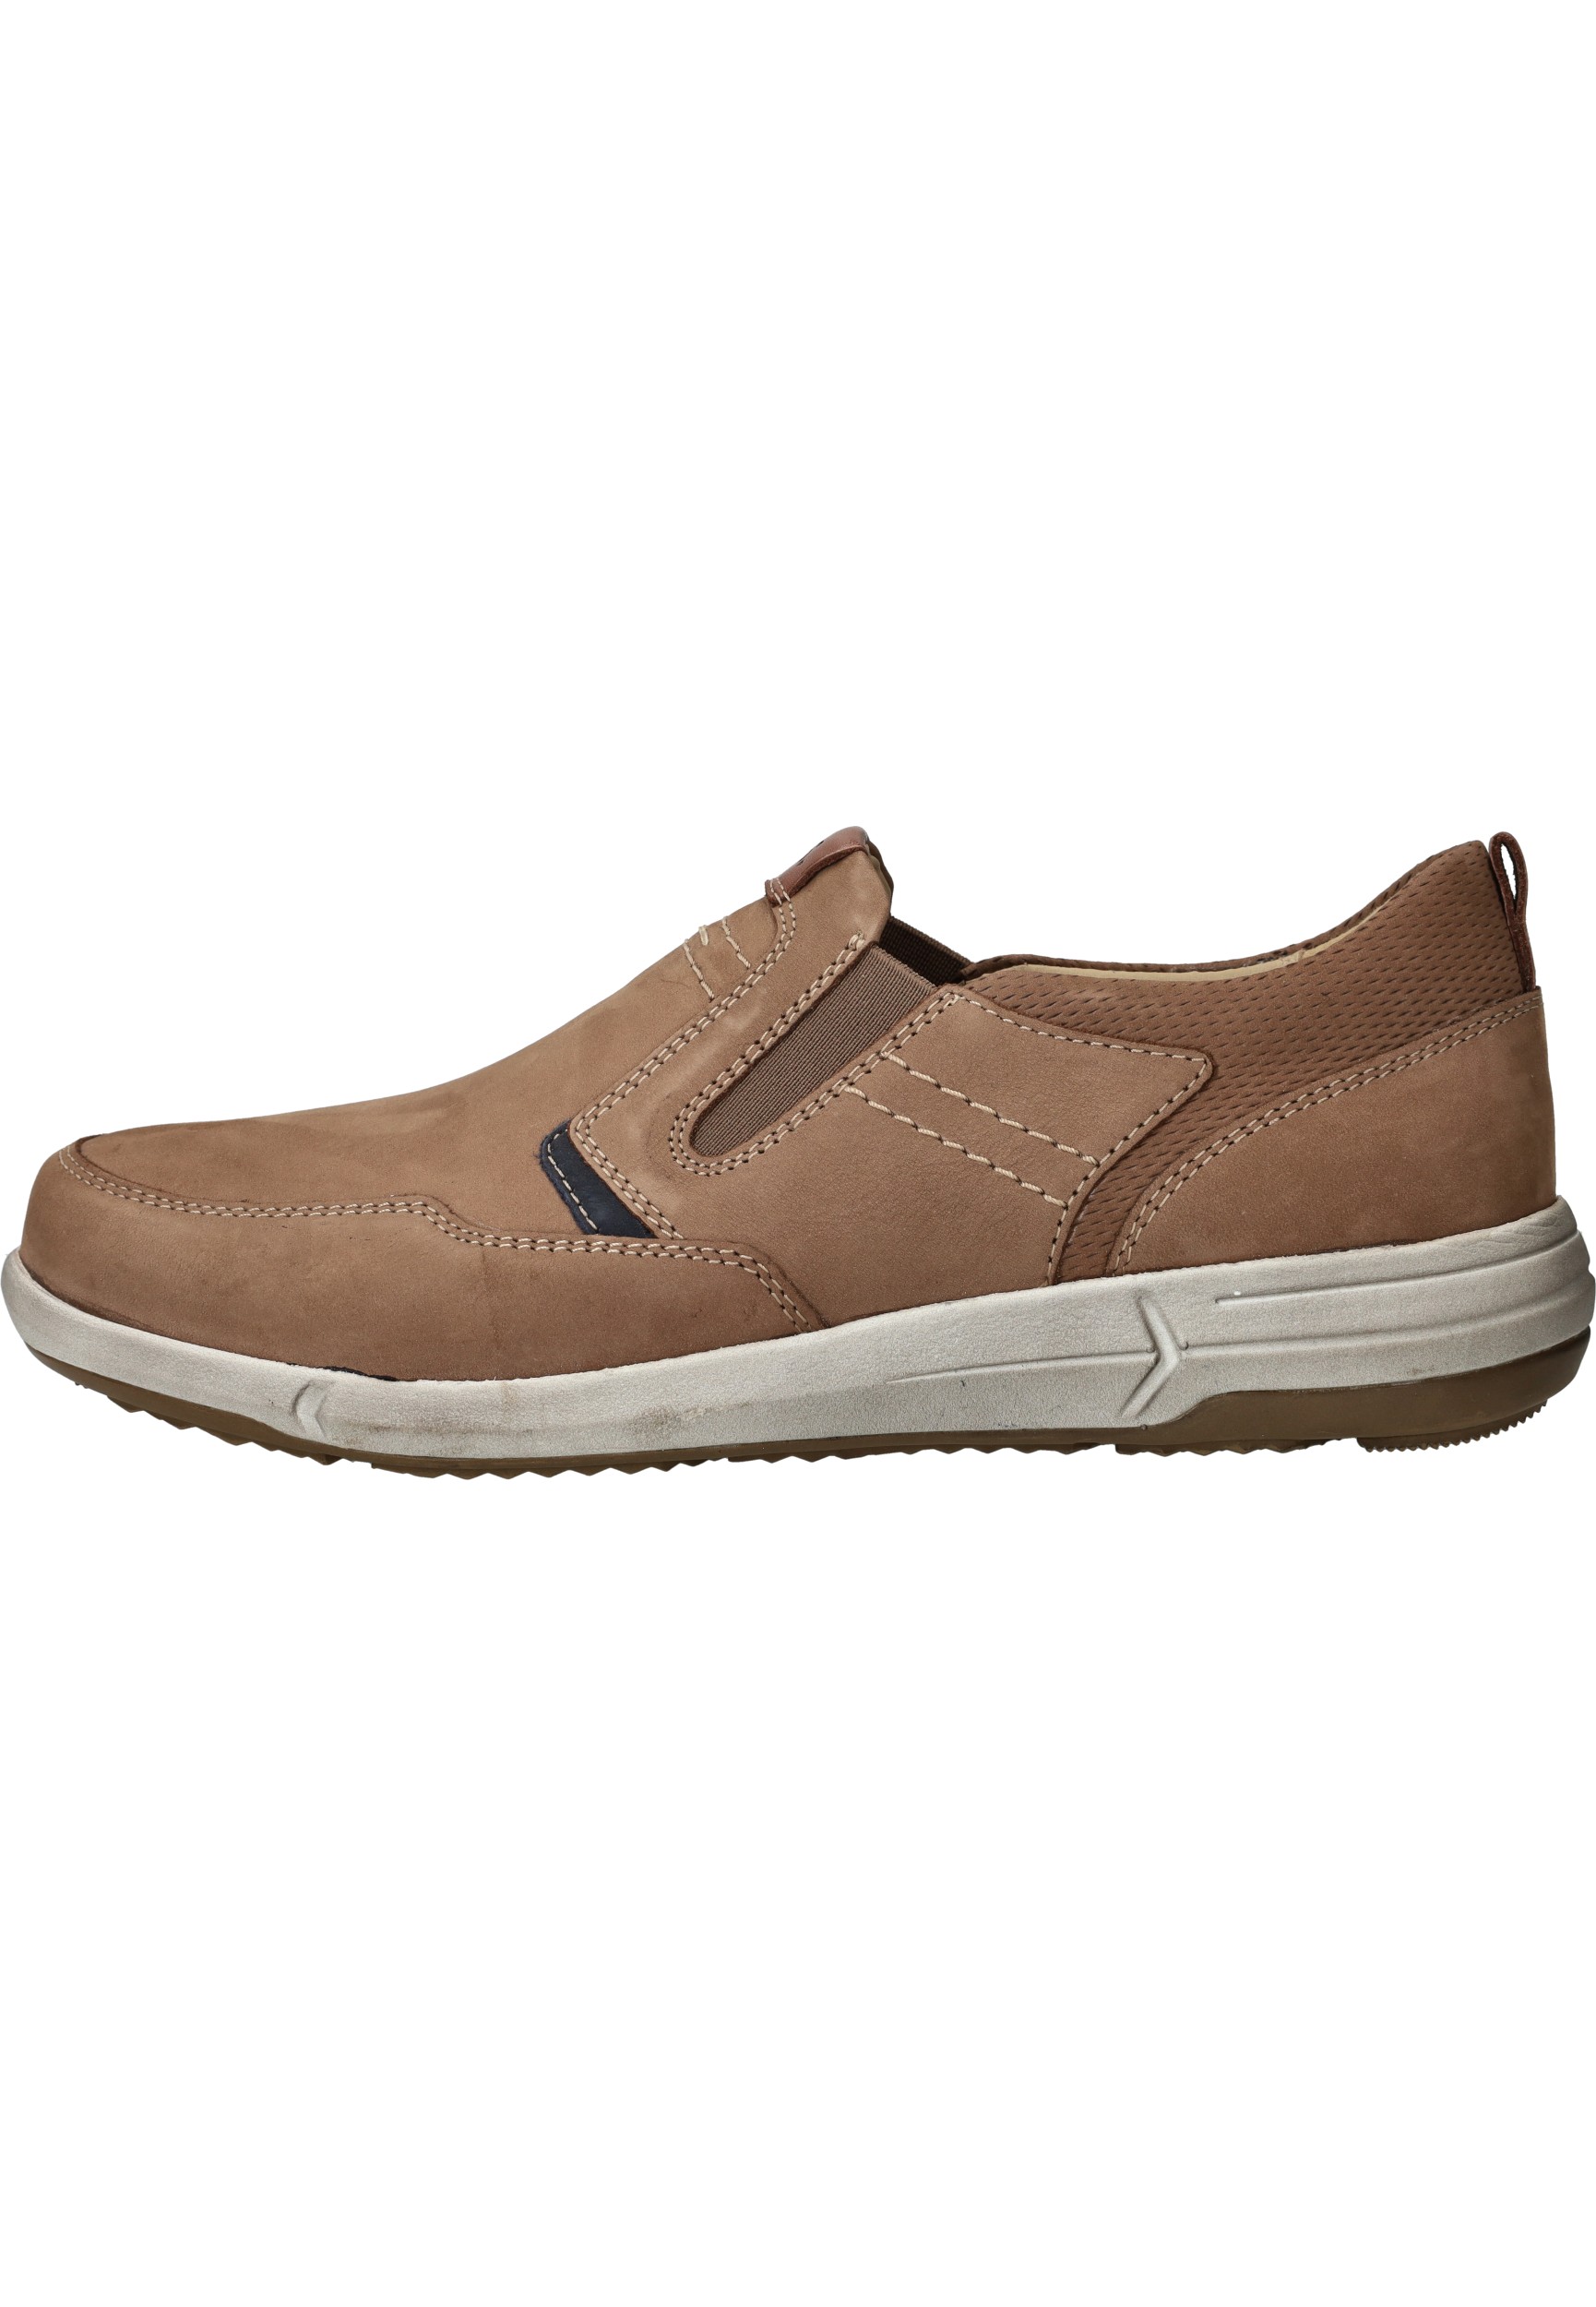 Josef Seibel Heren Moccassin Taupe TAUPE 47